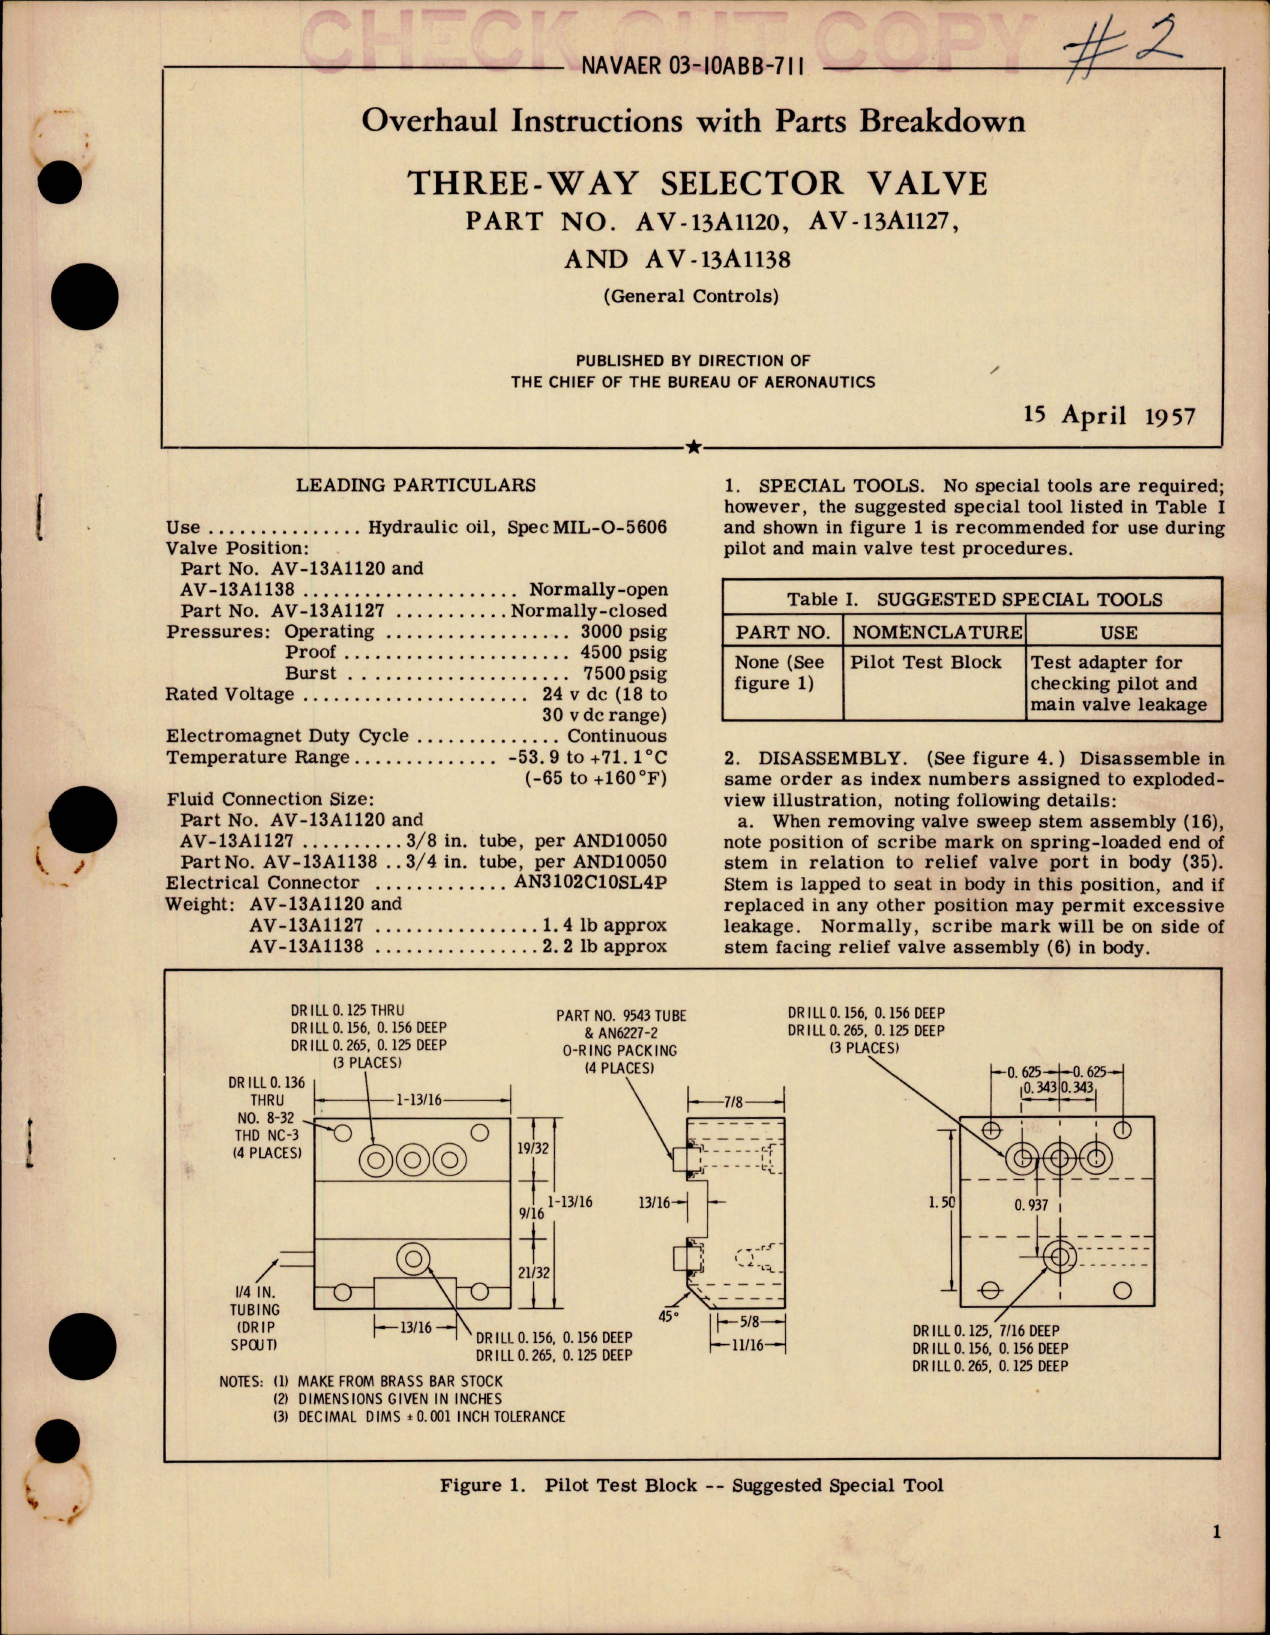 Sample page 1 from AirCorps Library document: Overhaul Instructions with Parts for Three Way Selector Valve - Parts AV-13A1120, AV-13A1127 and AV-13A1138